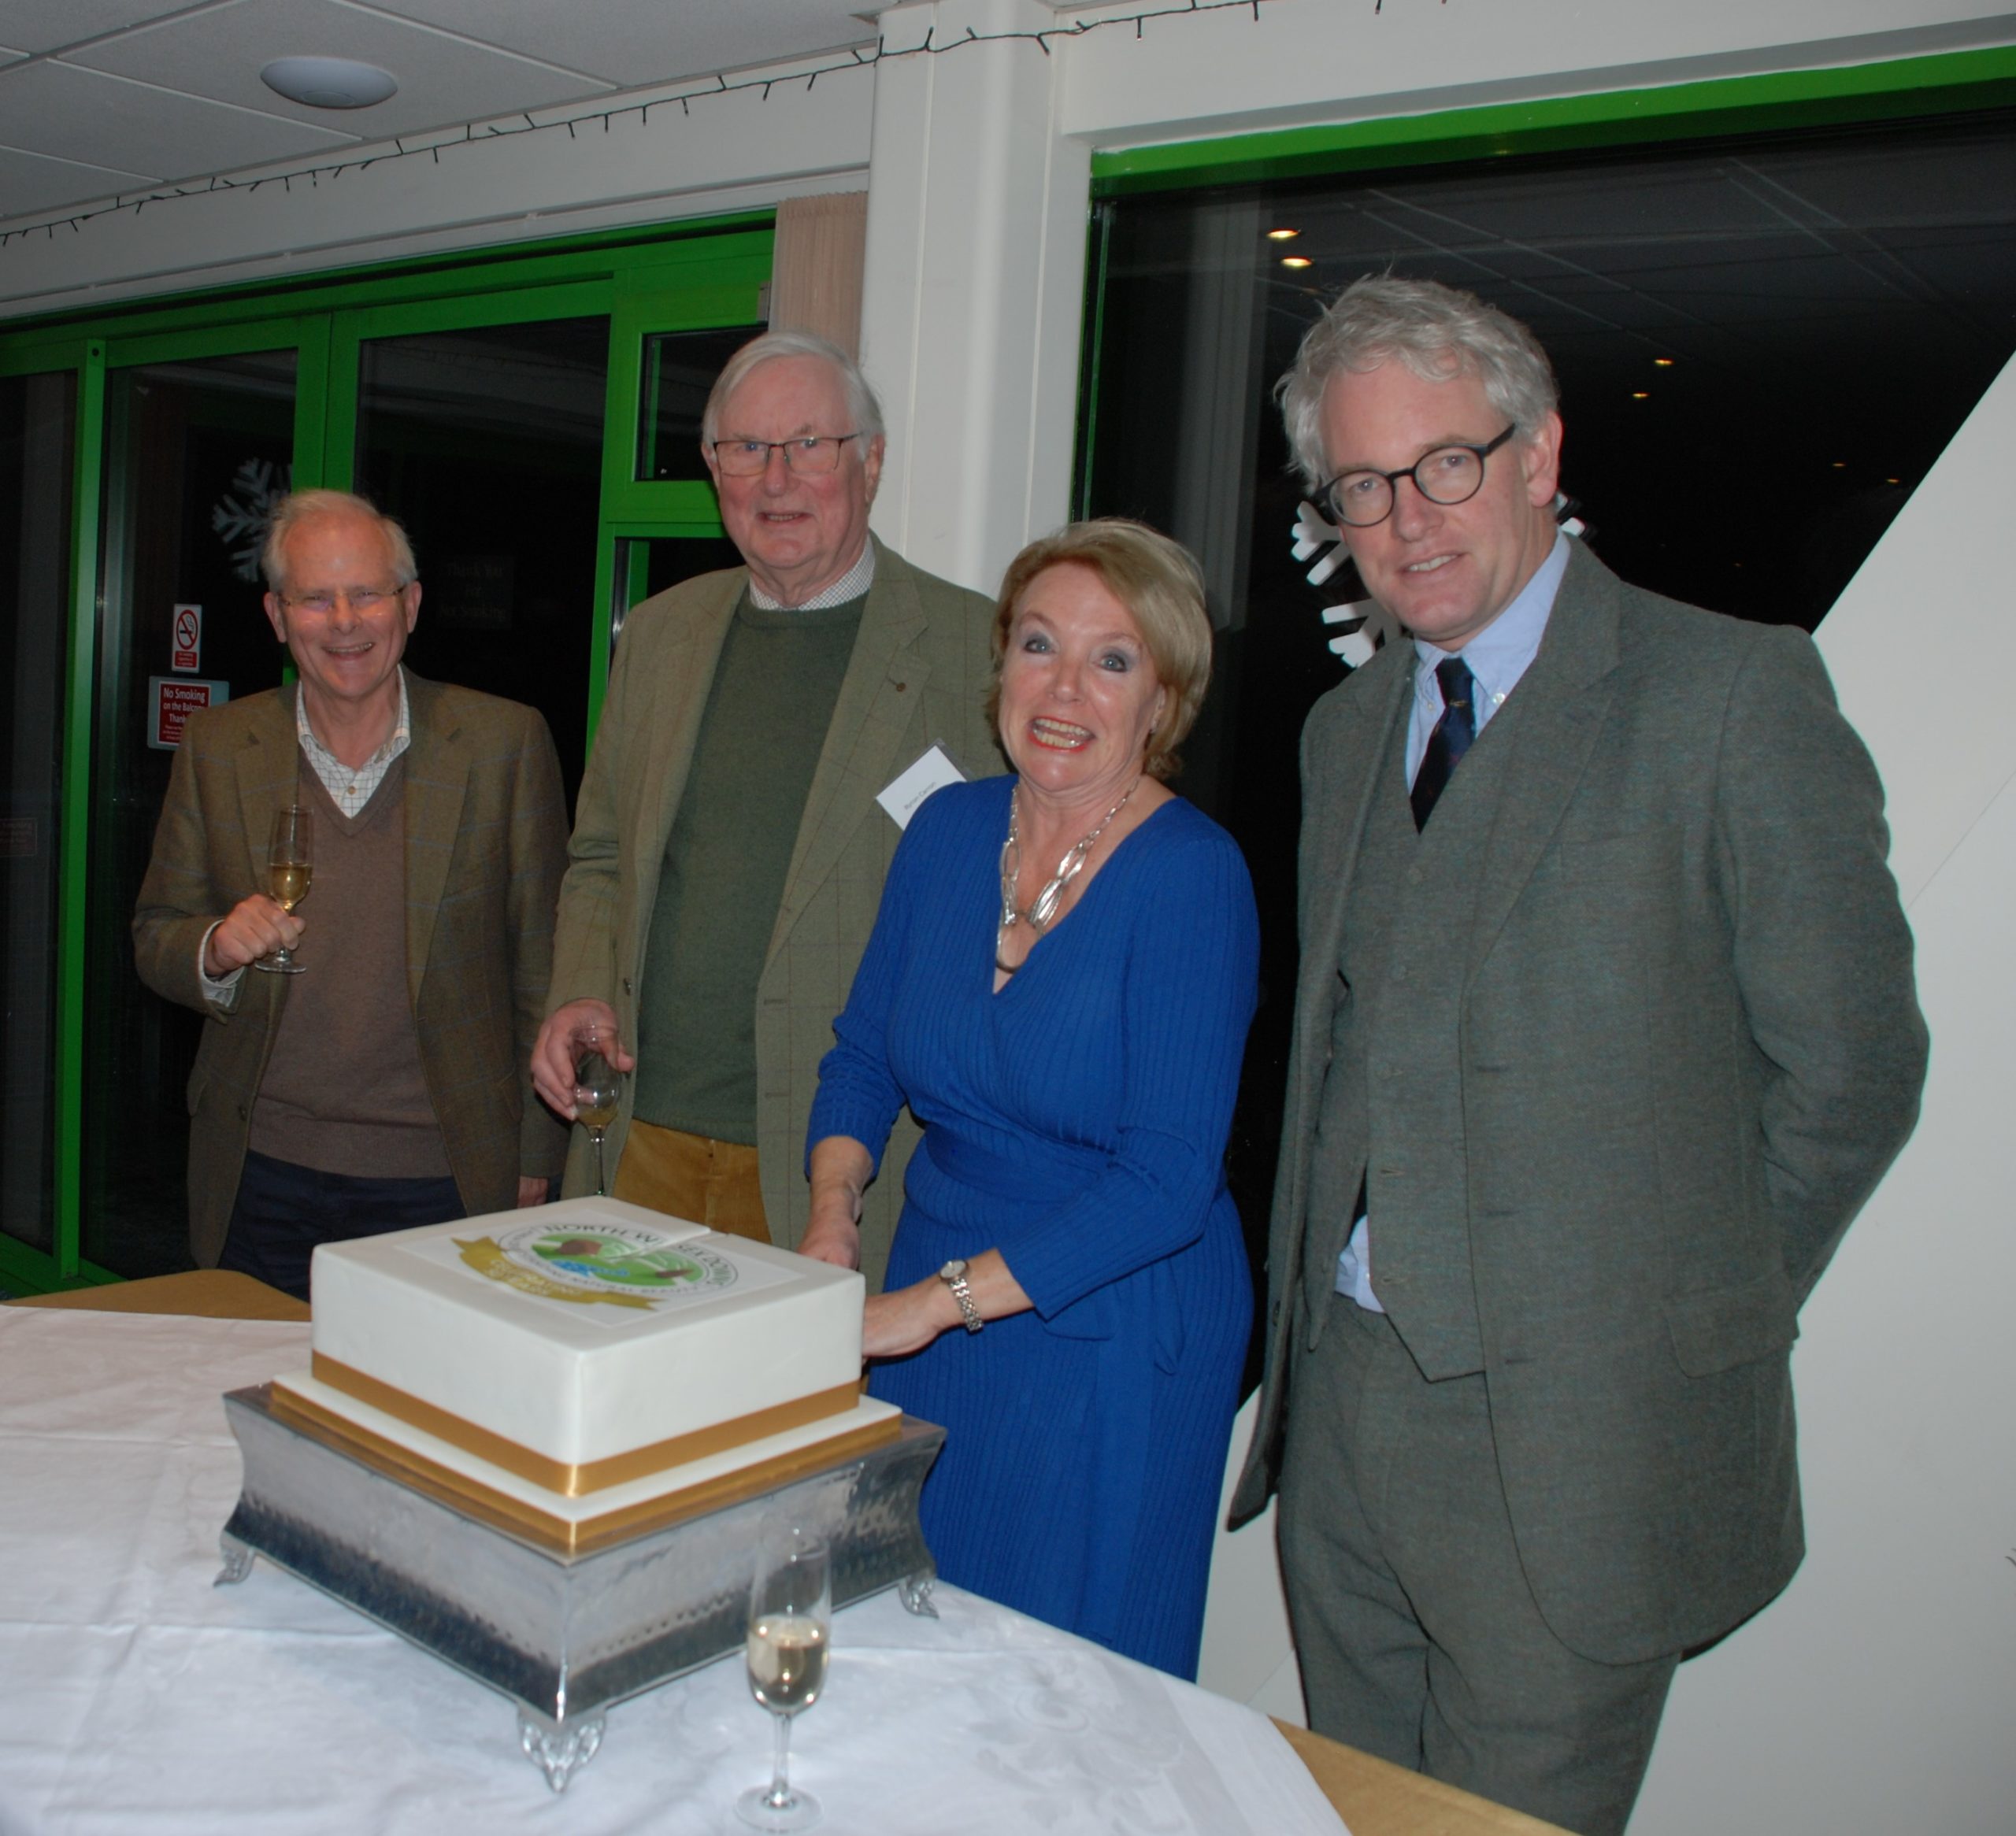 A woman is cutting a celebratory cake while three men stand beside her and look at the camera